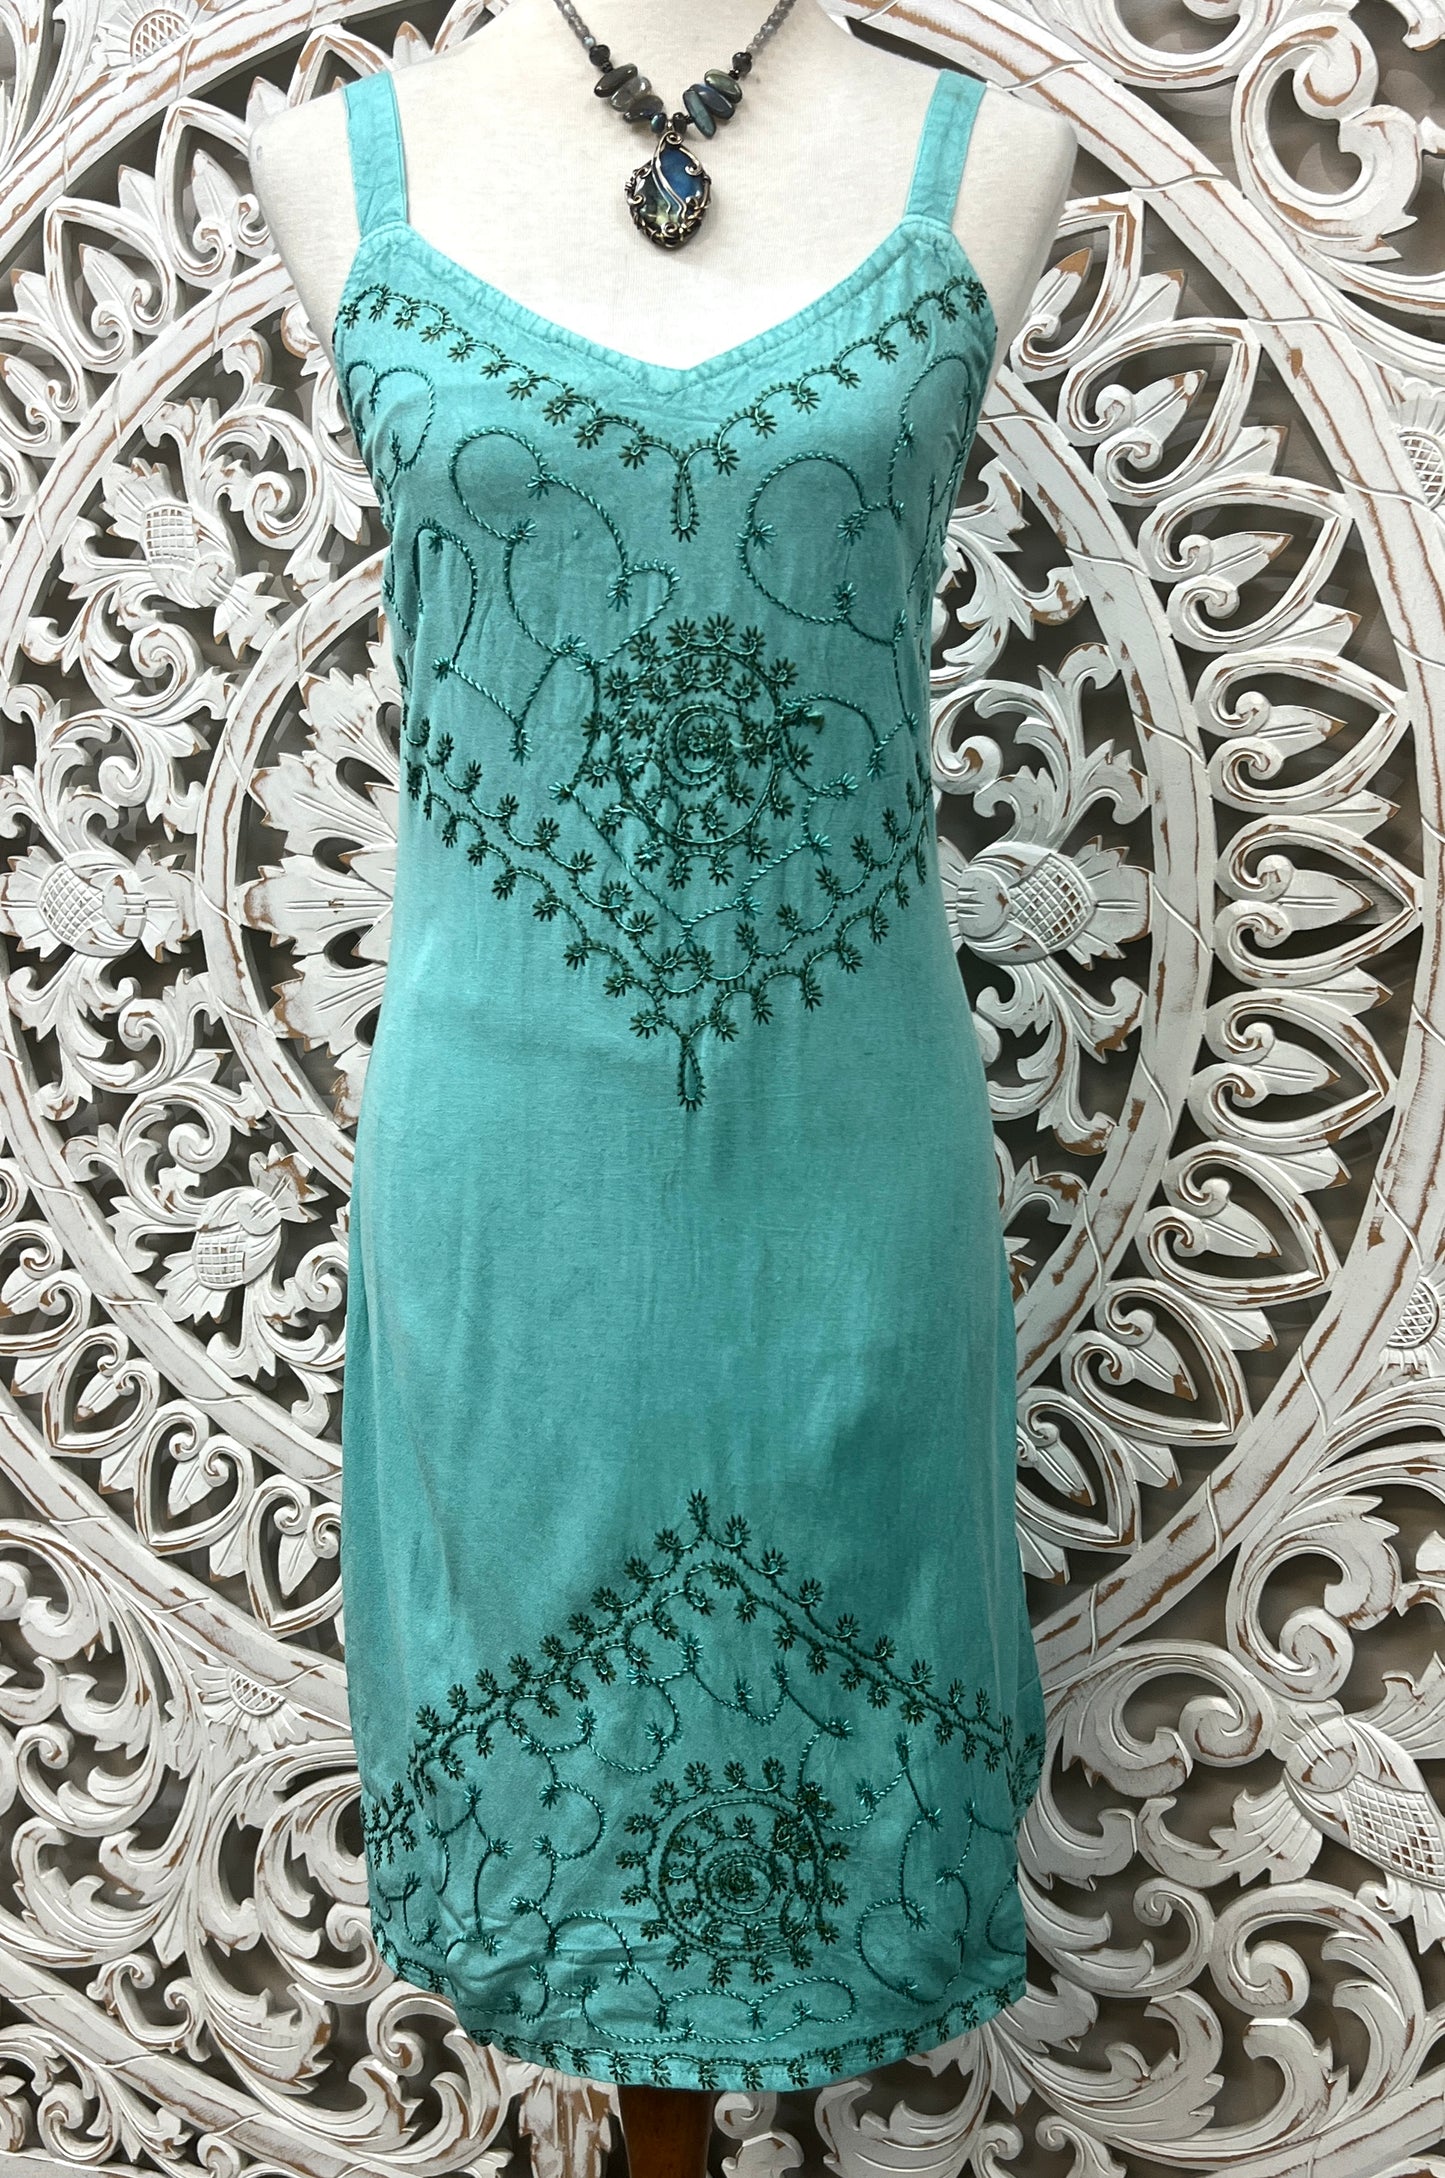 Embroidered Sun Dress Style